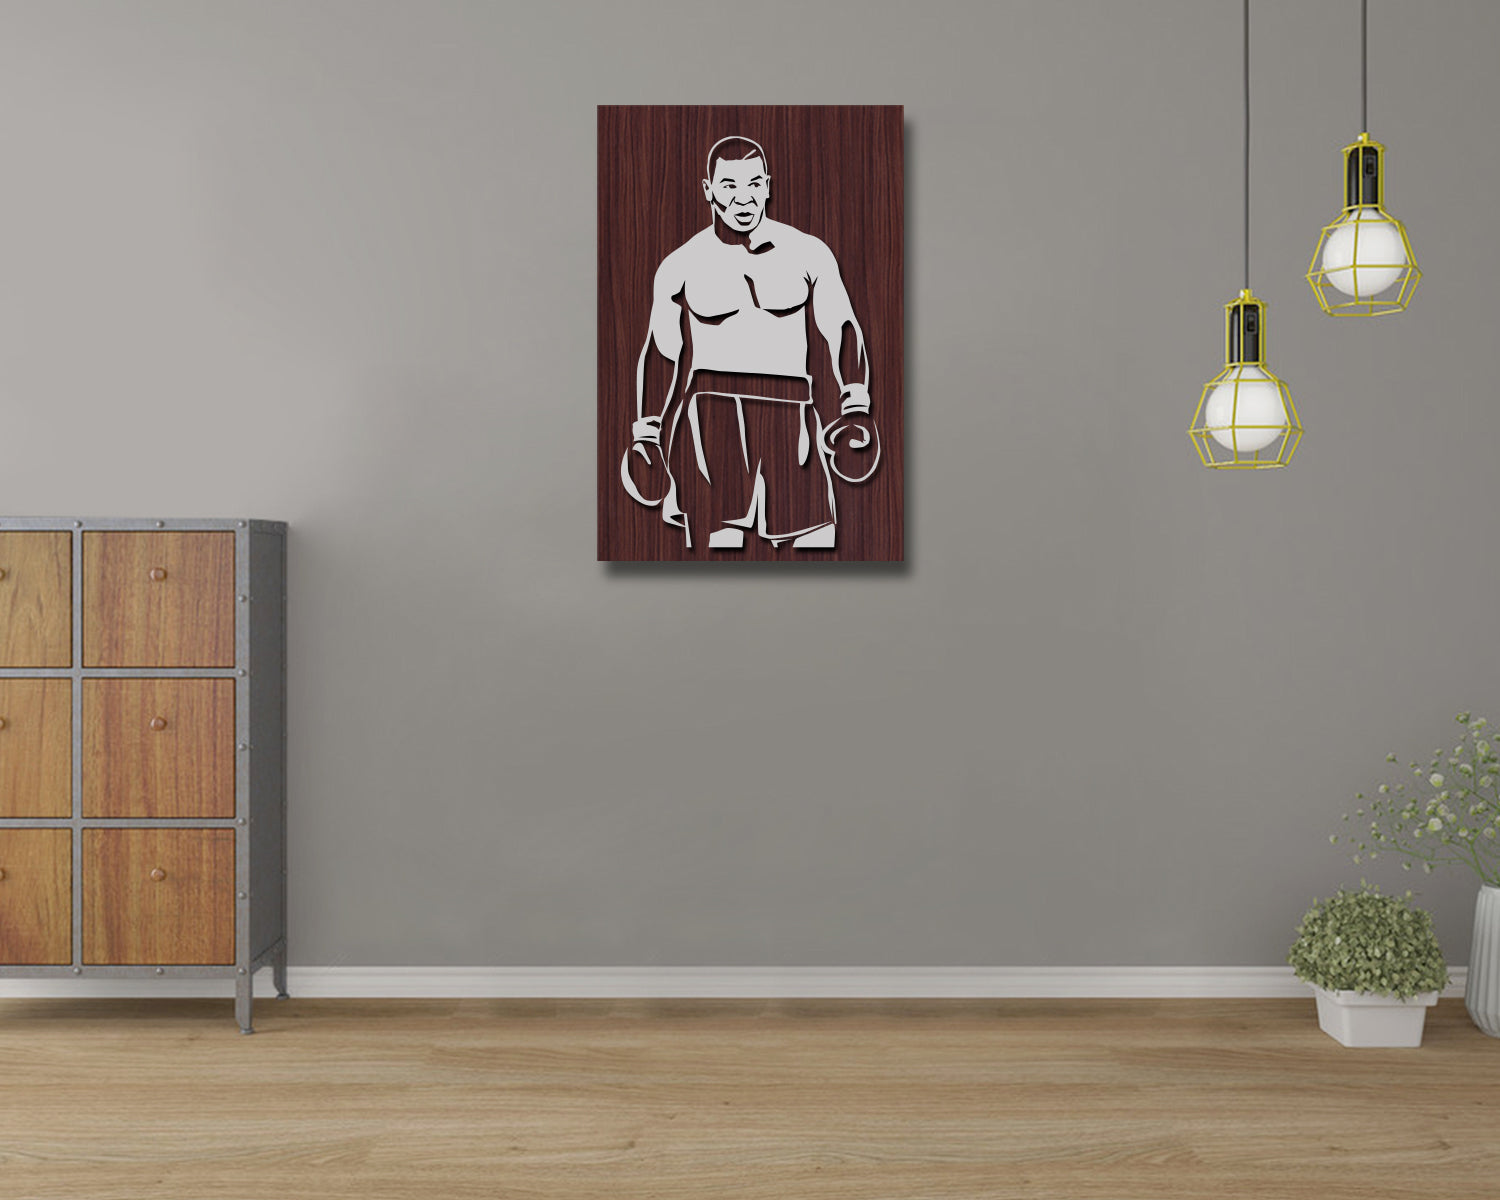 Mike Tyson LED Wooden Decal 